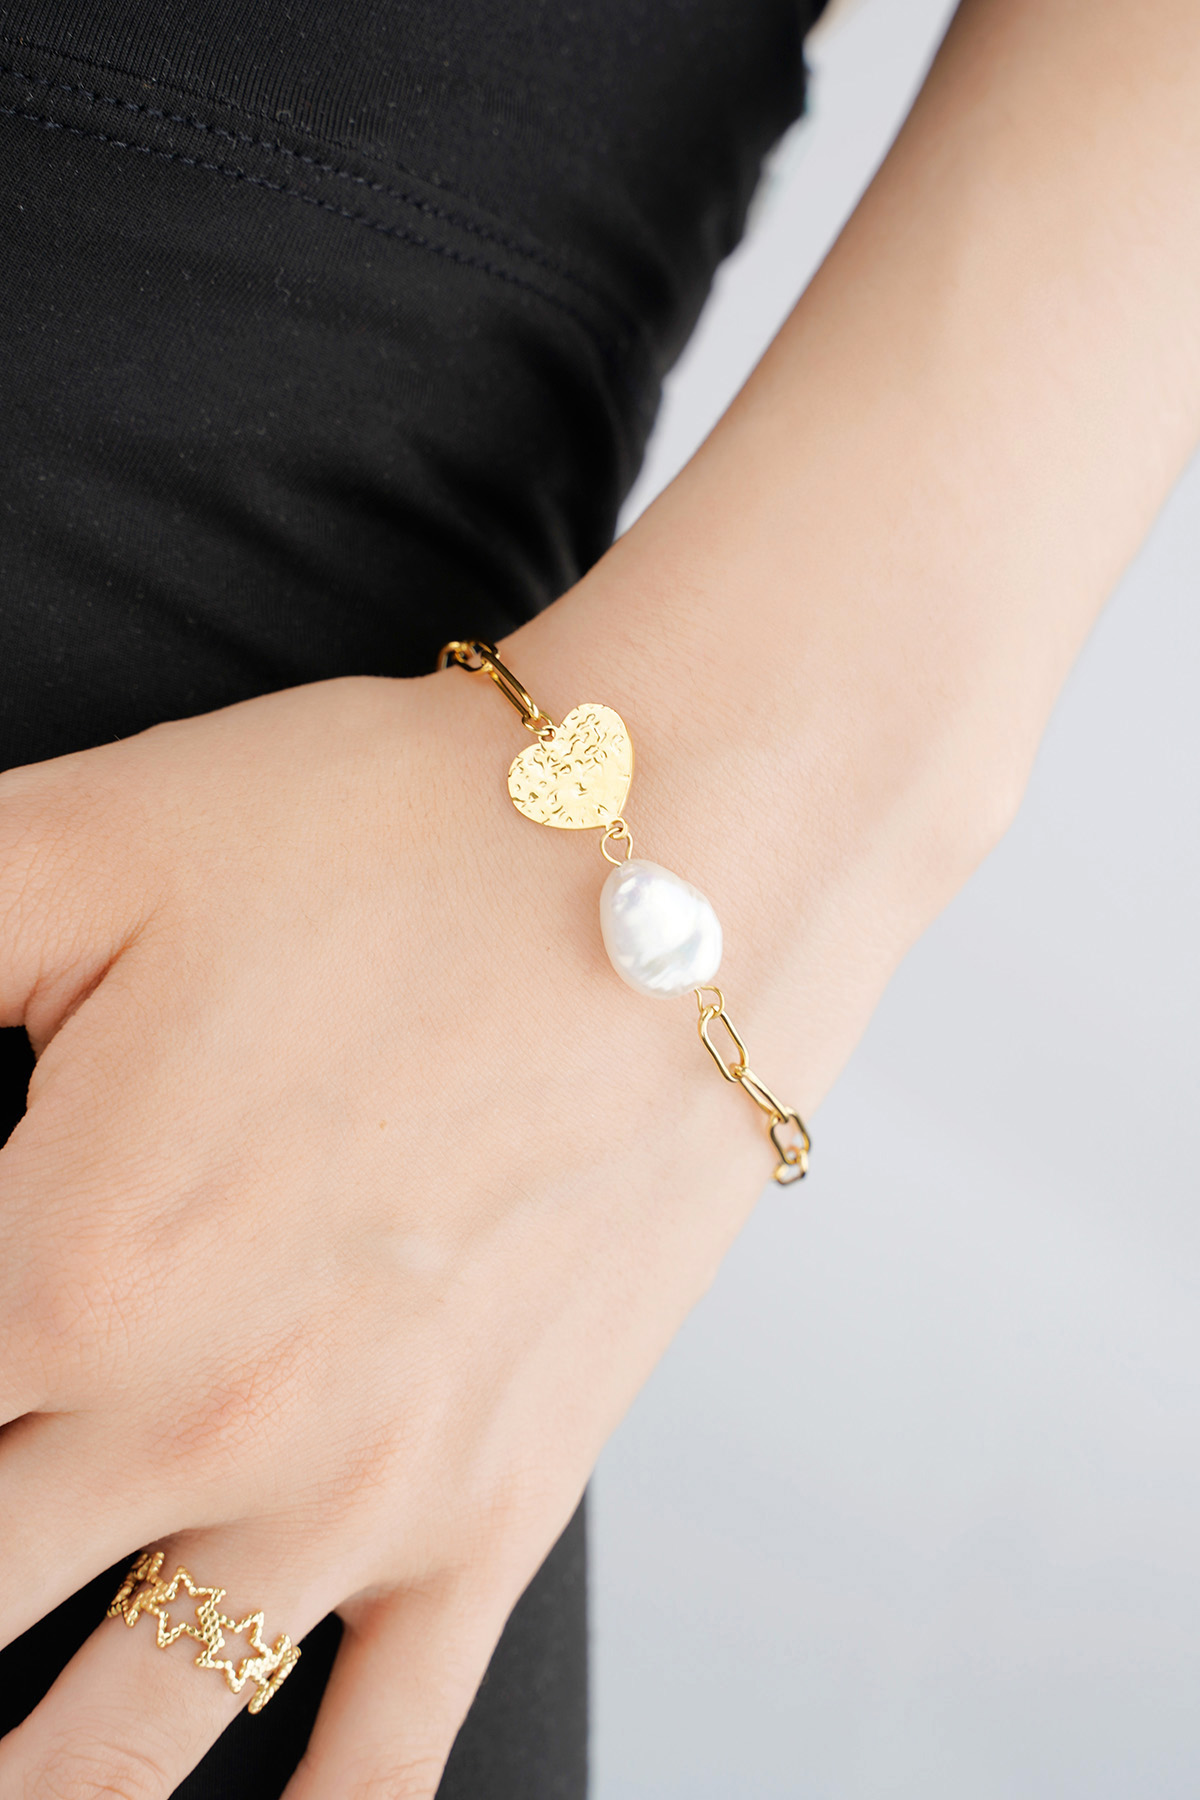 Armband amour toujours - goud h5 Afbeelding3